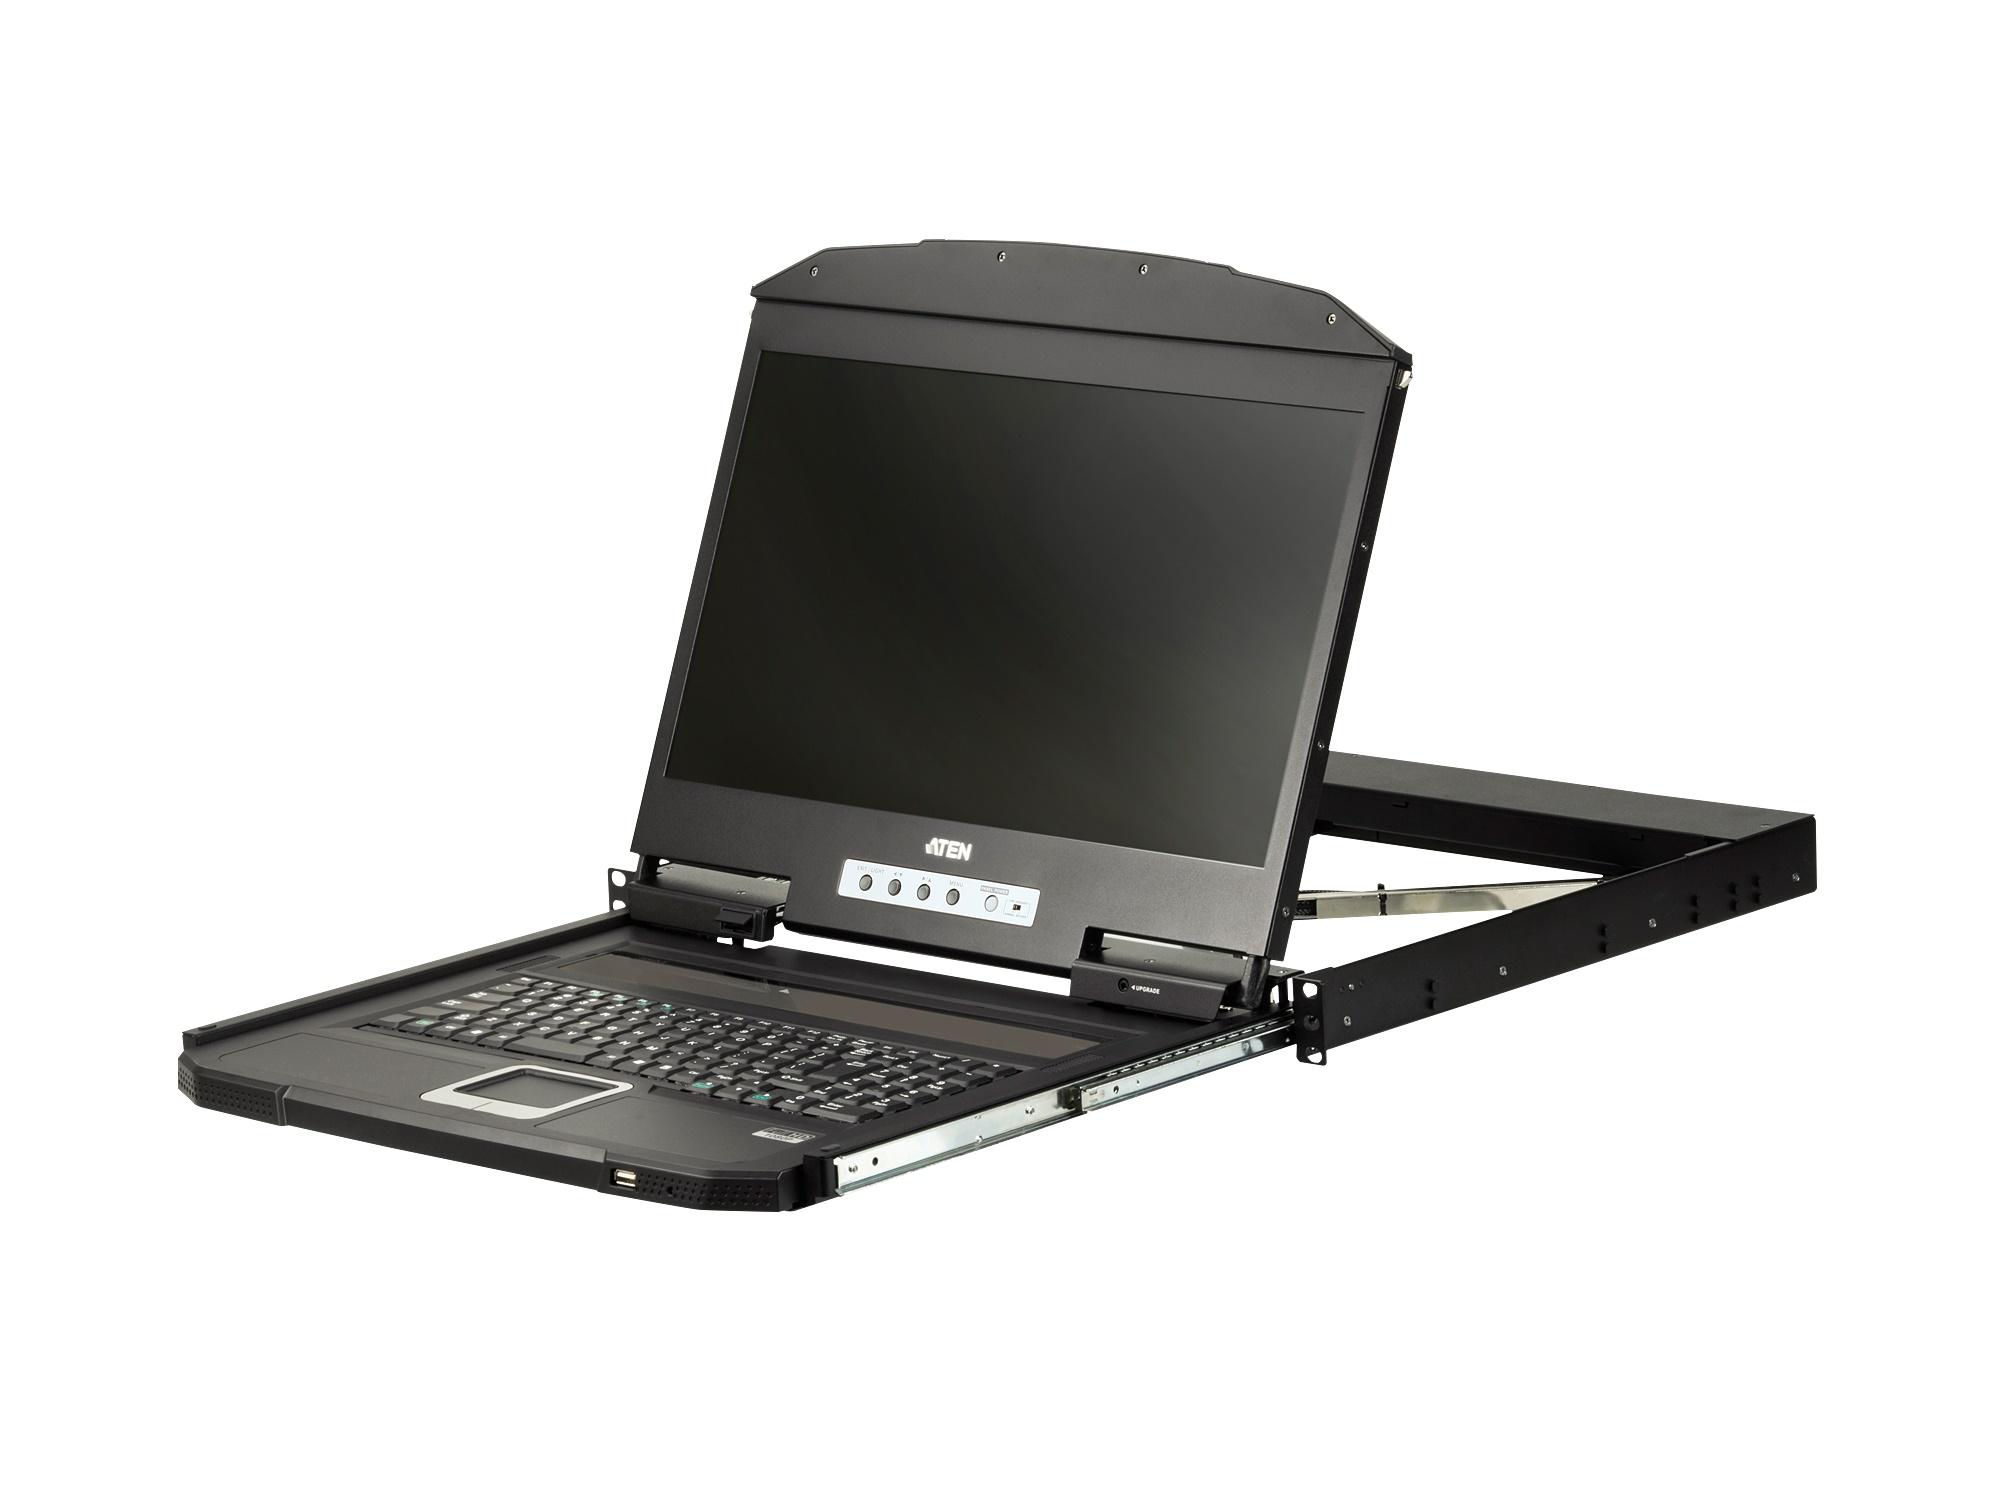 CL3100NX 1U Ultra Short Depth Single Rail WideScreen LCD Console (USB/VGA) with Resolution of 1366x768 by Aten